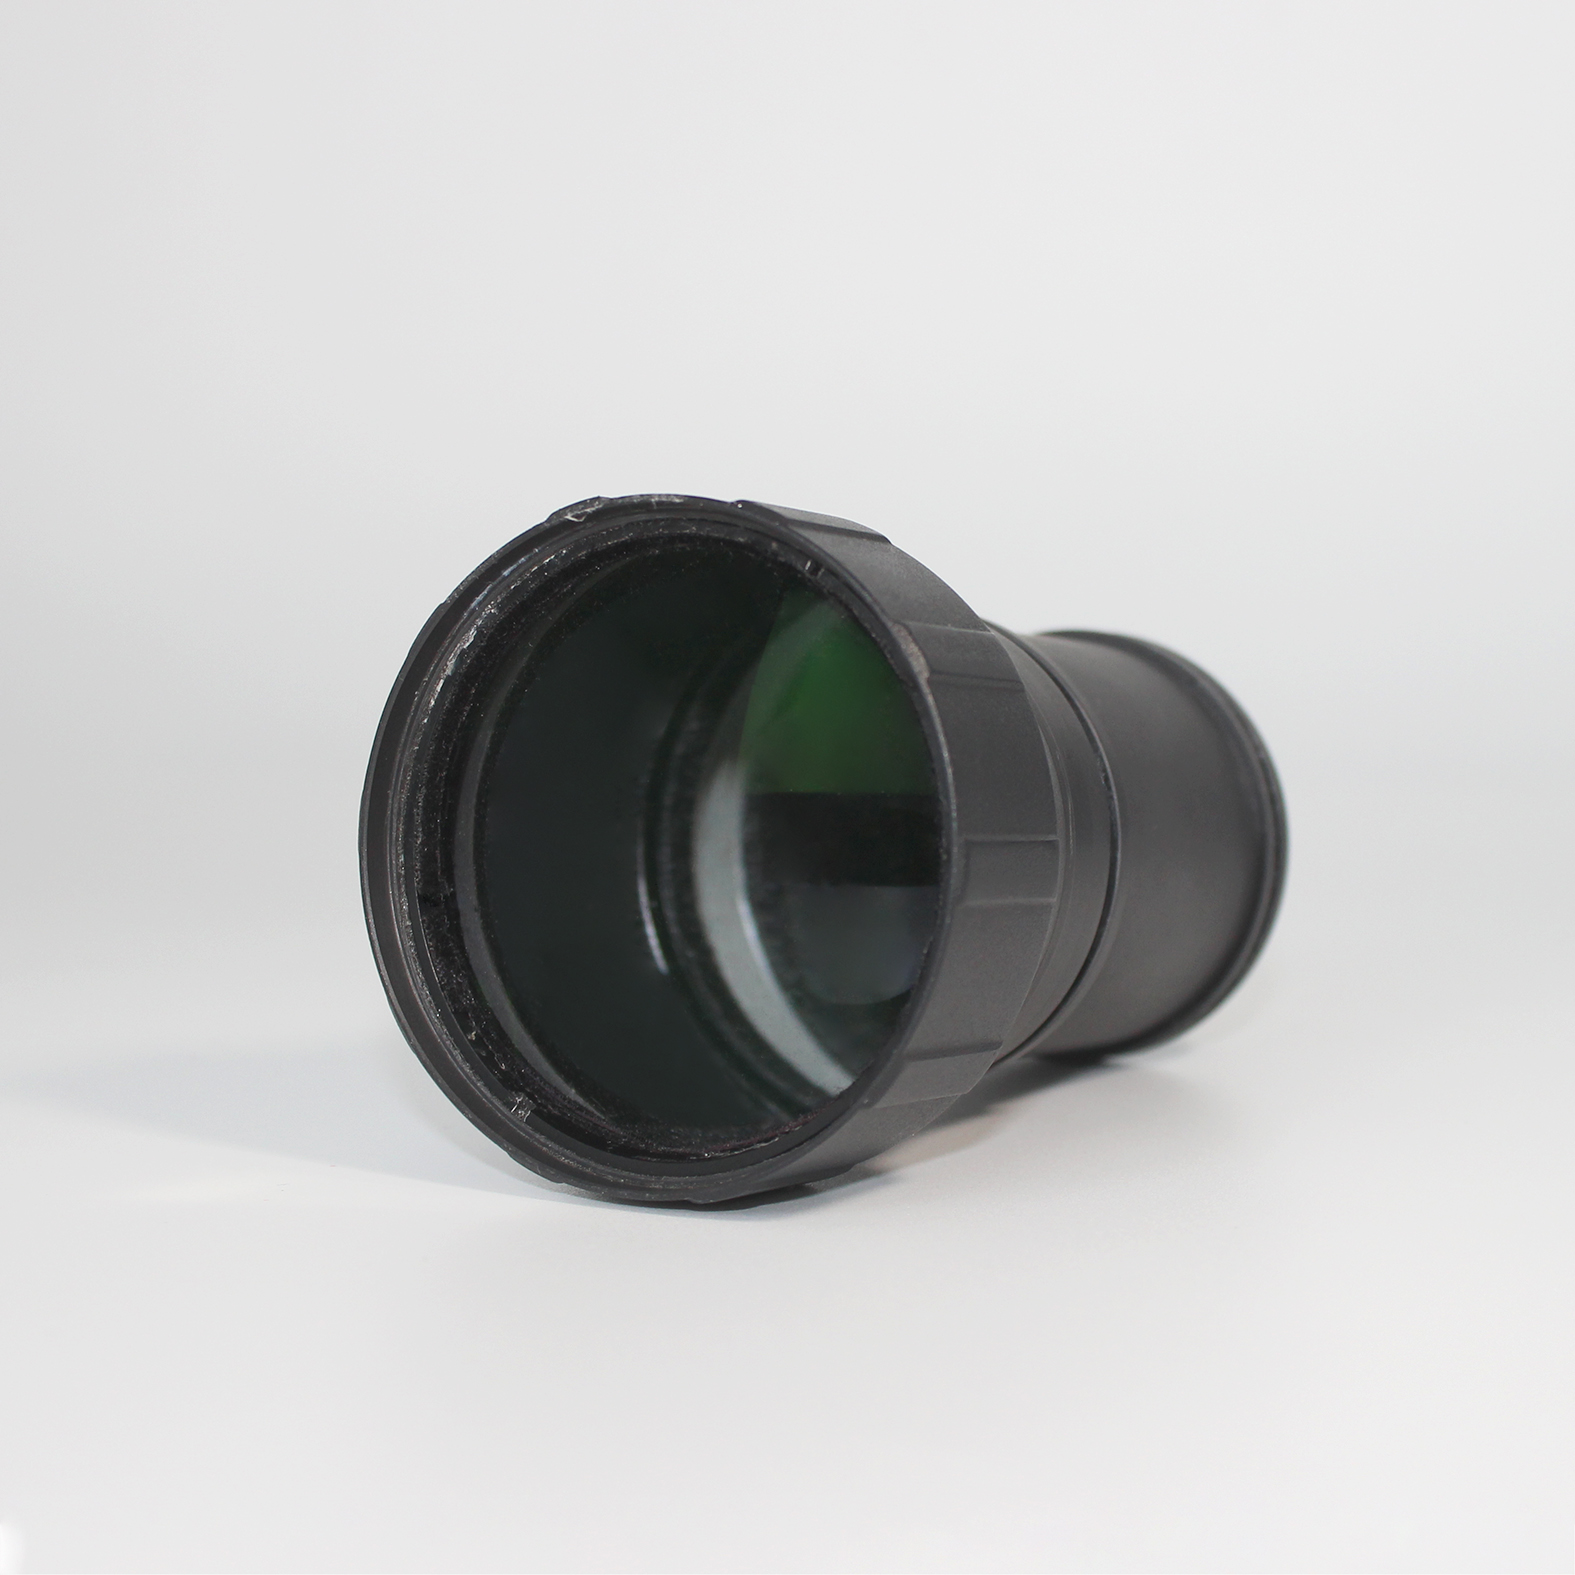 China Supplier Sale Monocular Telephoto Low Light Night Vision Lenses